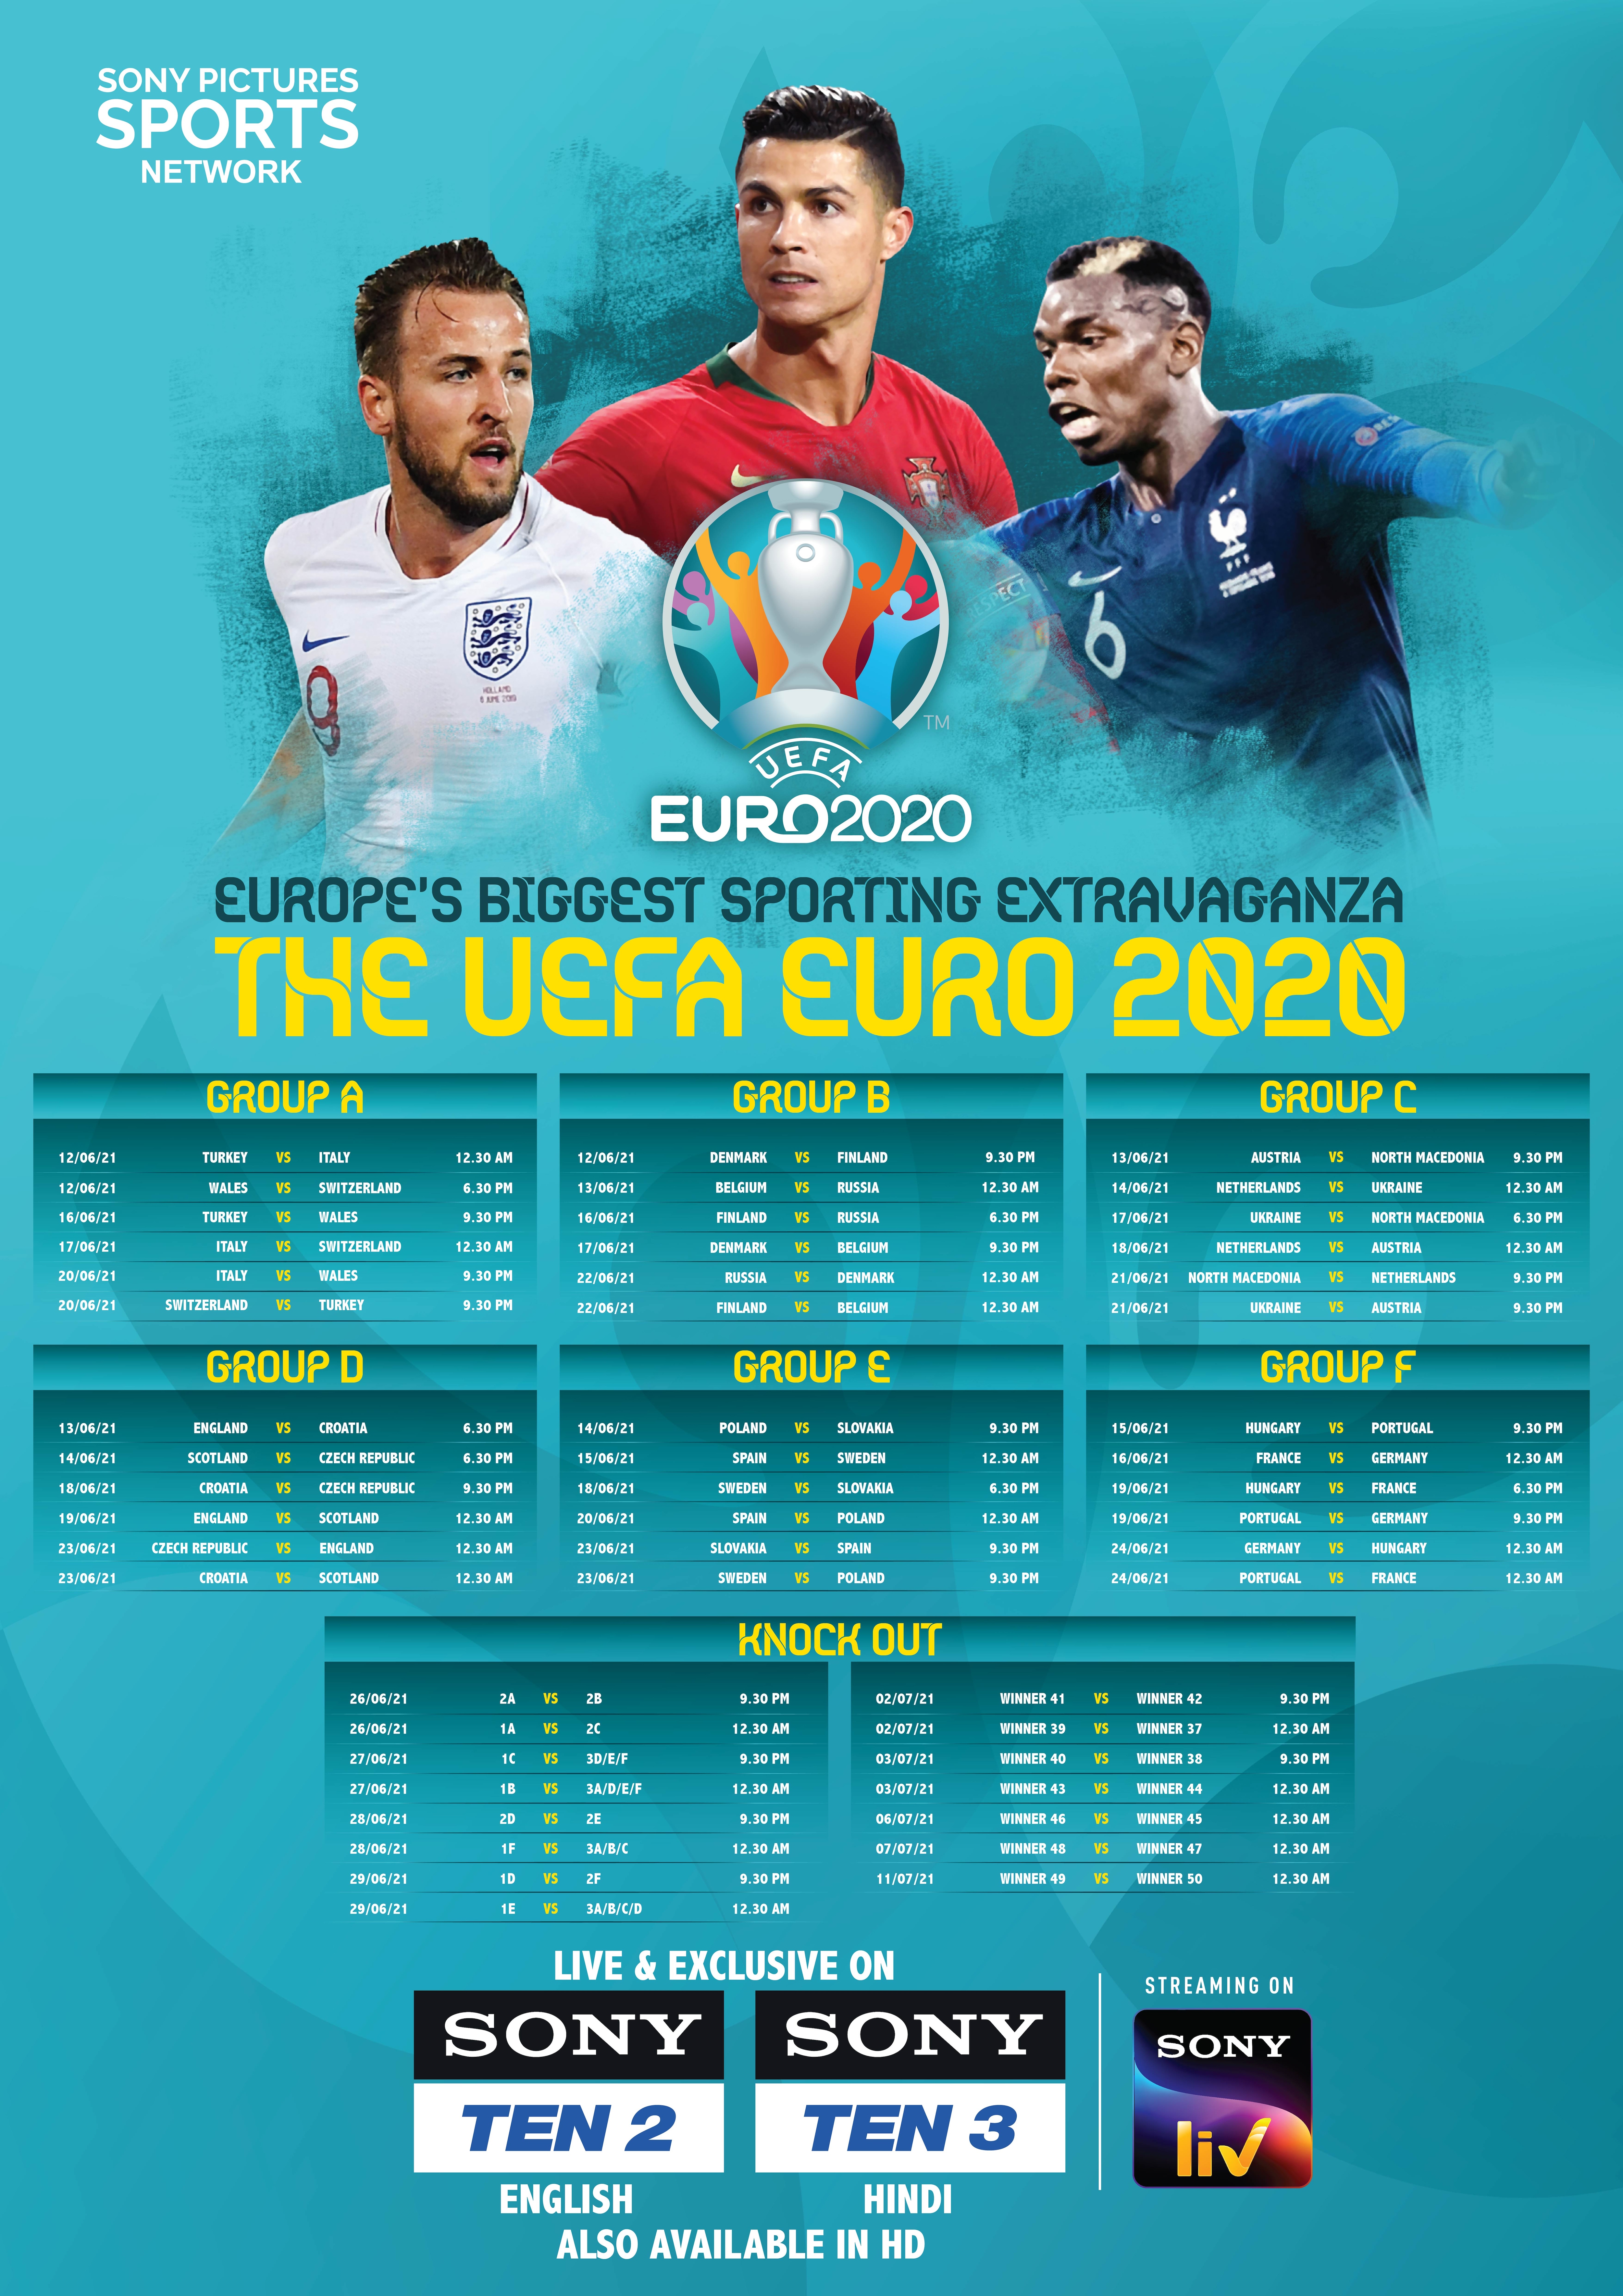 Euro 2020 Full Schedule Fixtures, Date, Time, Venue, Telecast - All you need to know Football News